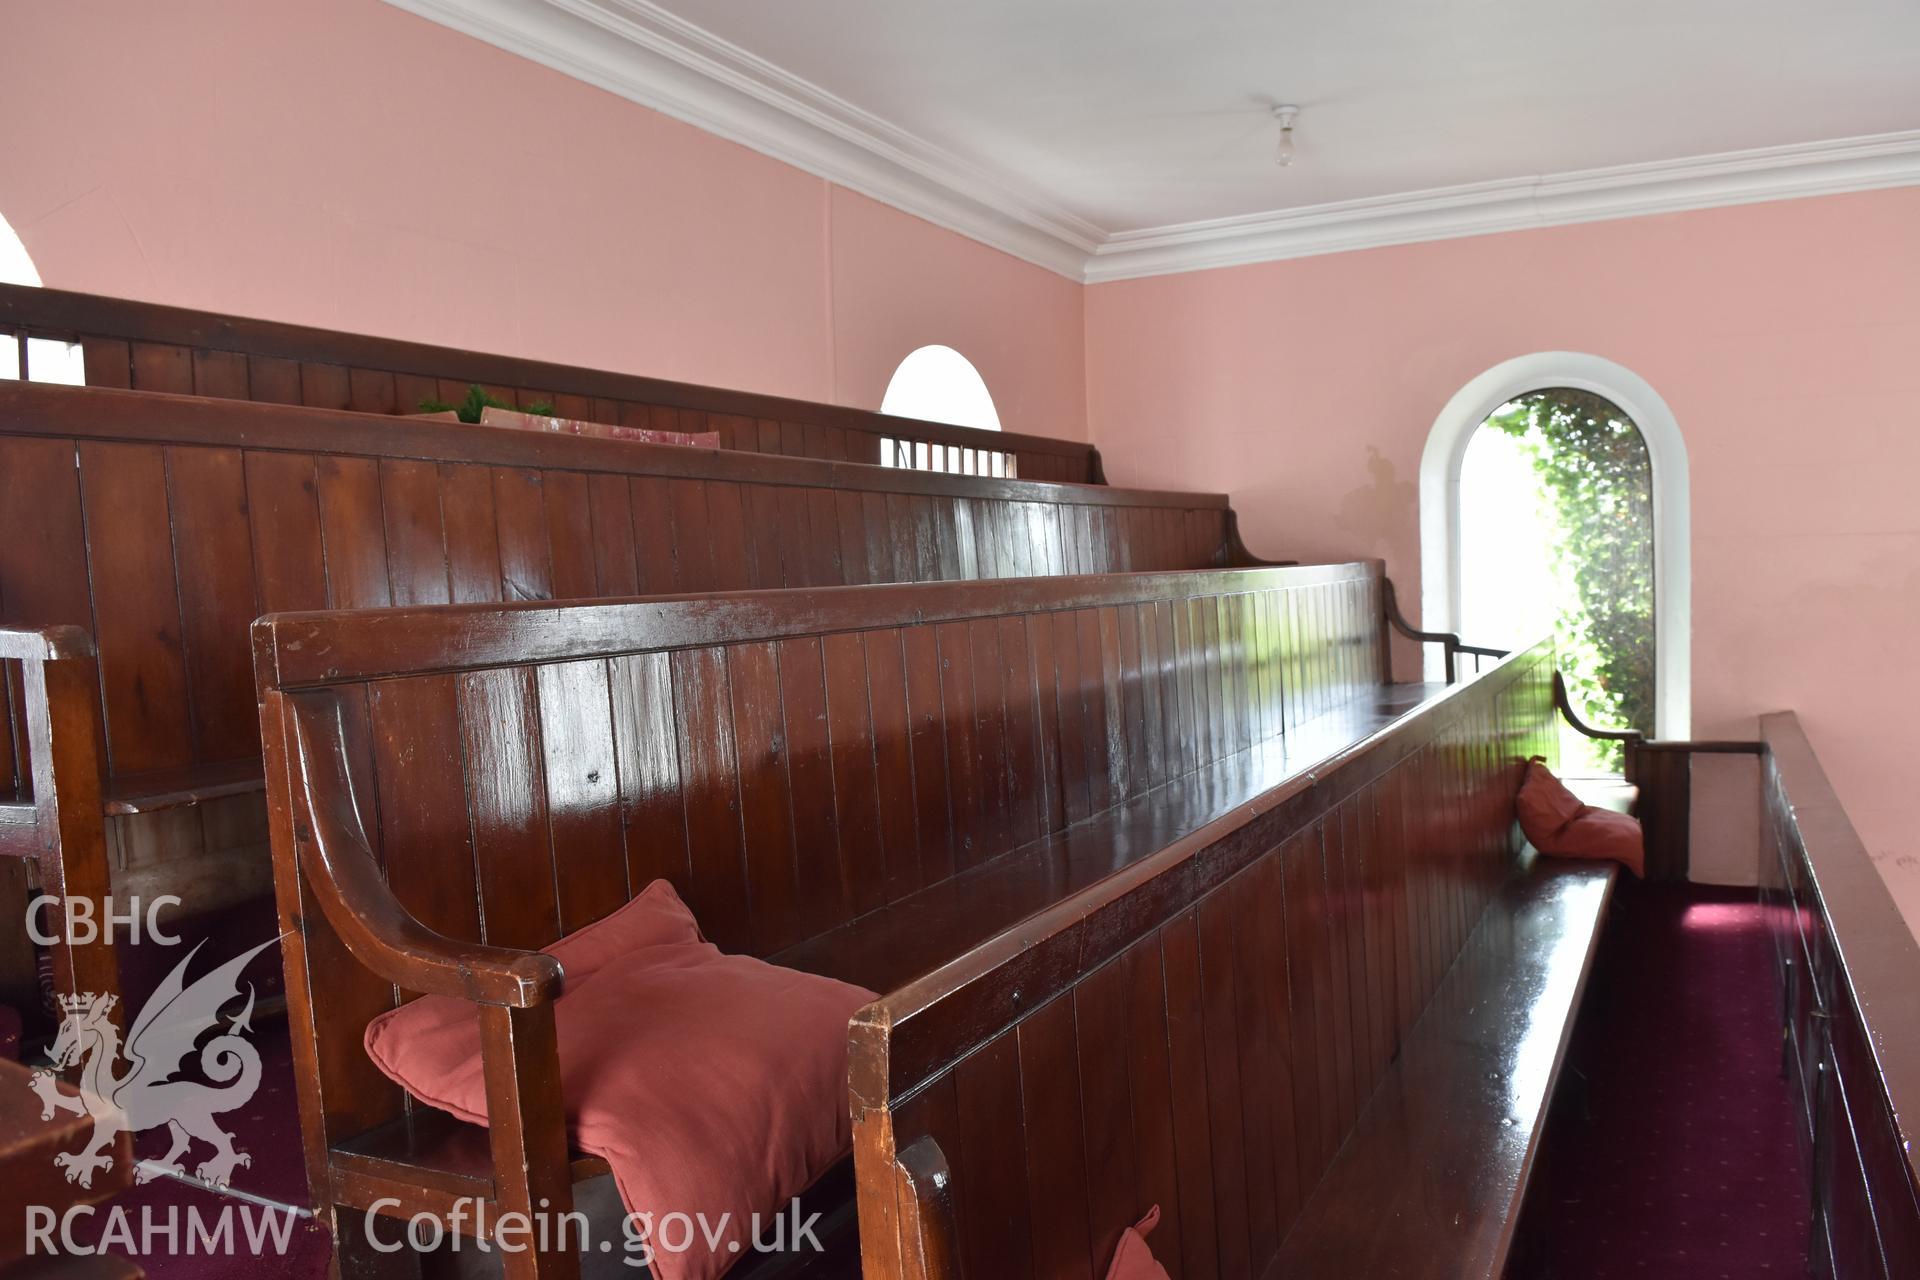 Colour photograph showing detail of wooden pews at the Baptist & Unitarian Chapel, Nottage, Porthcawl. Taken during photographic survey conducted by Sue Fielding on 12th May 2018.